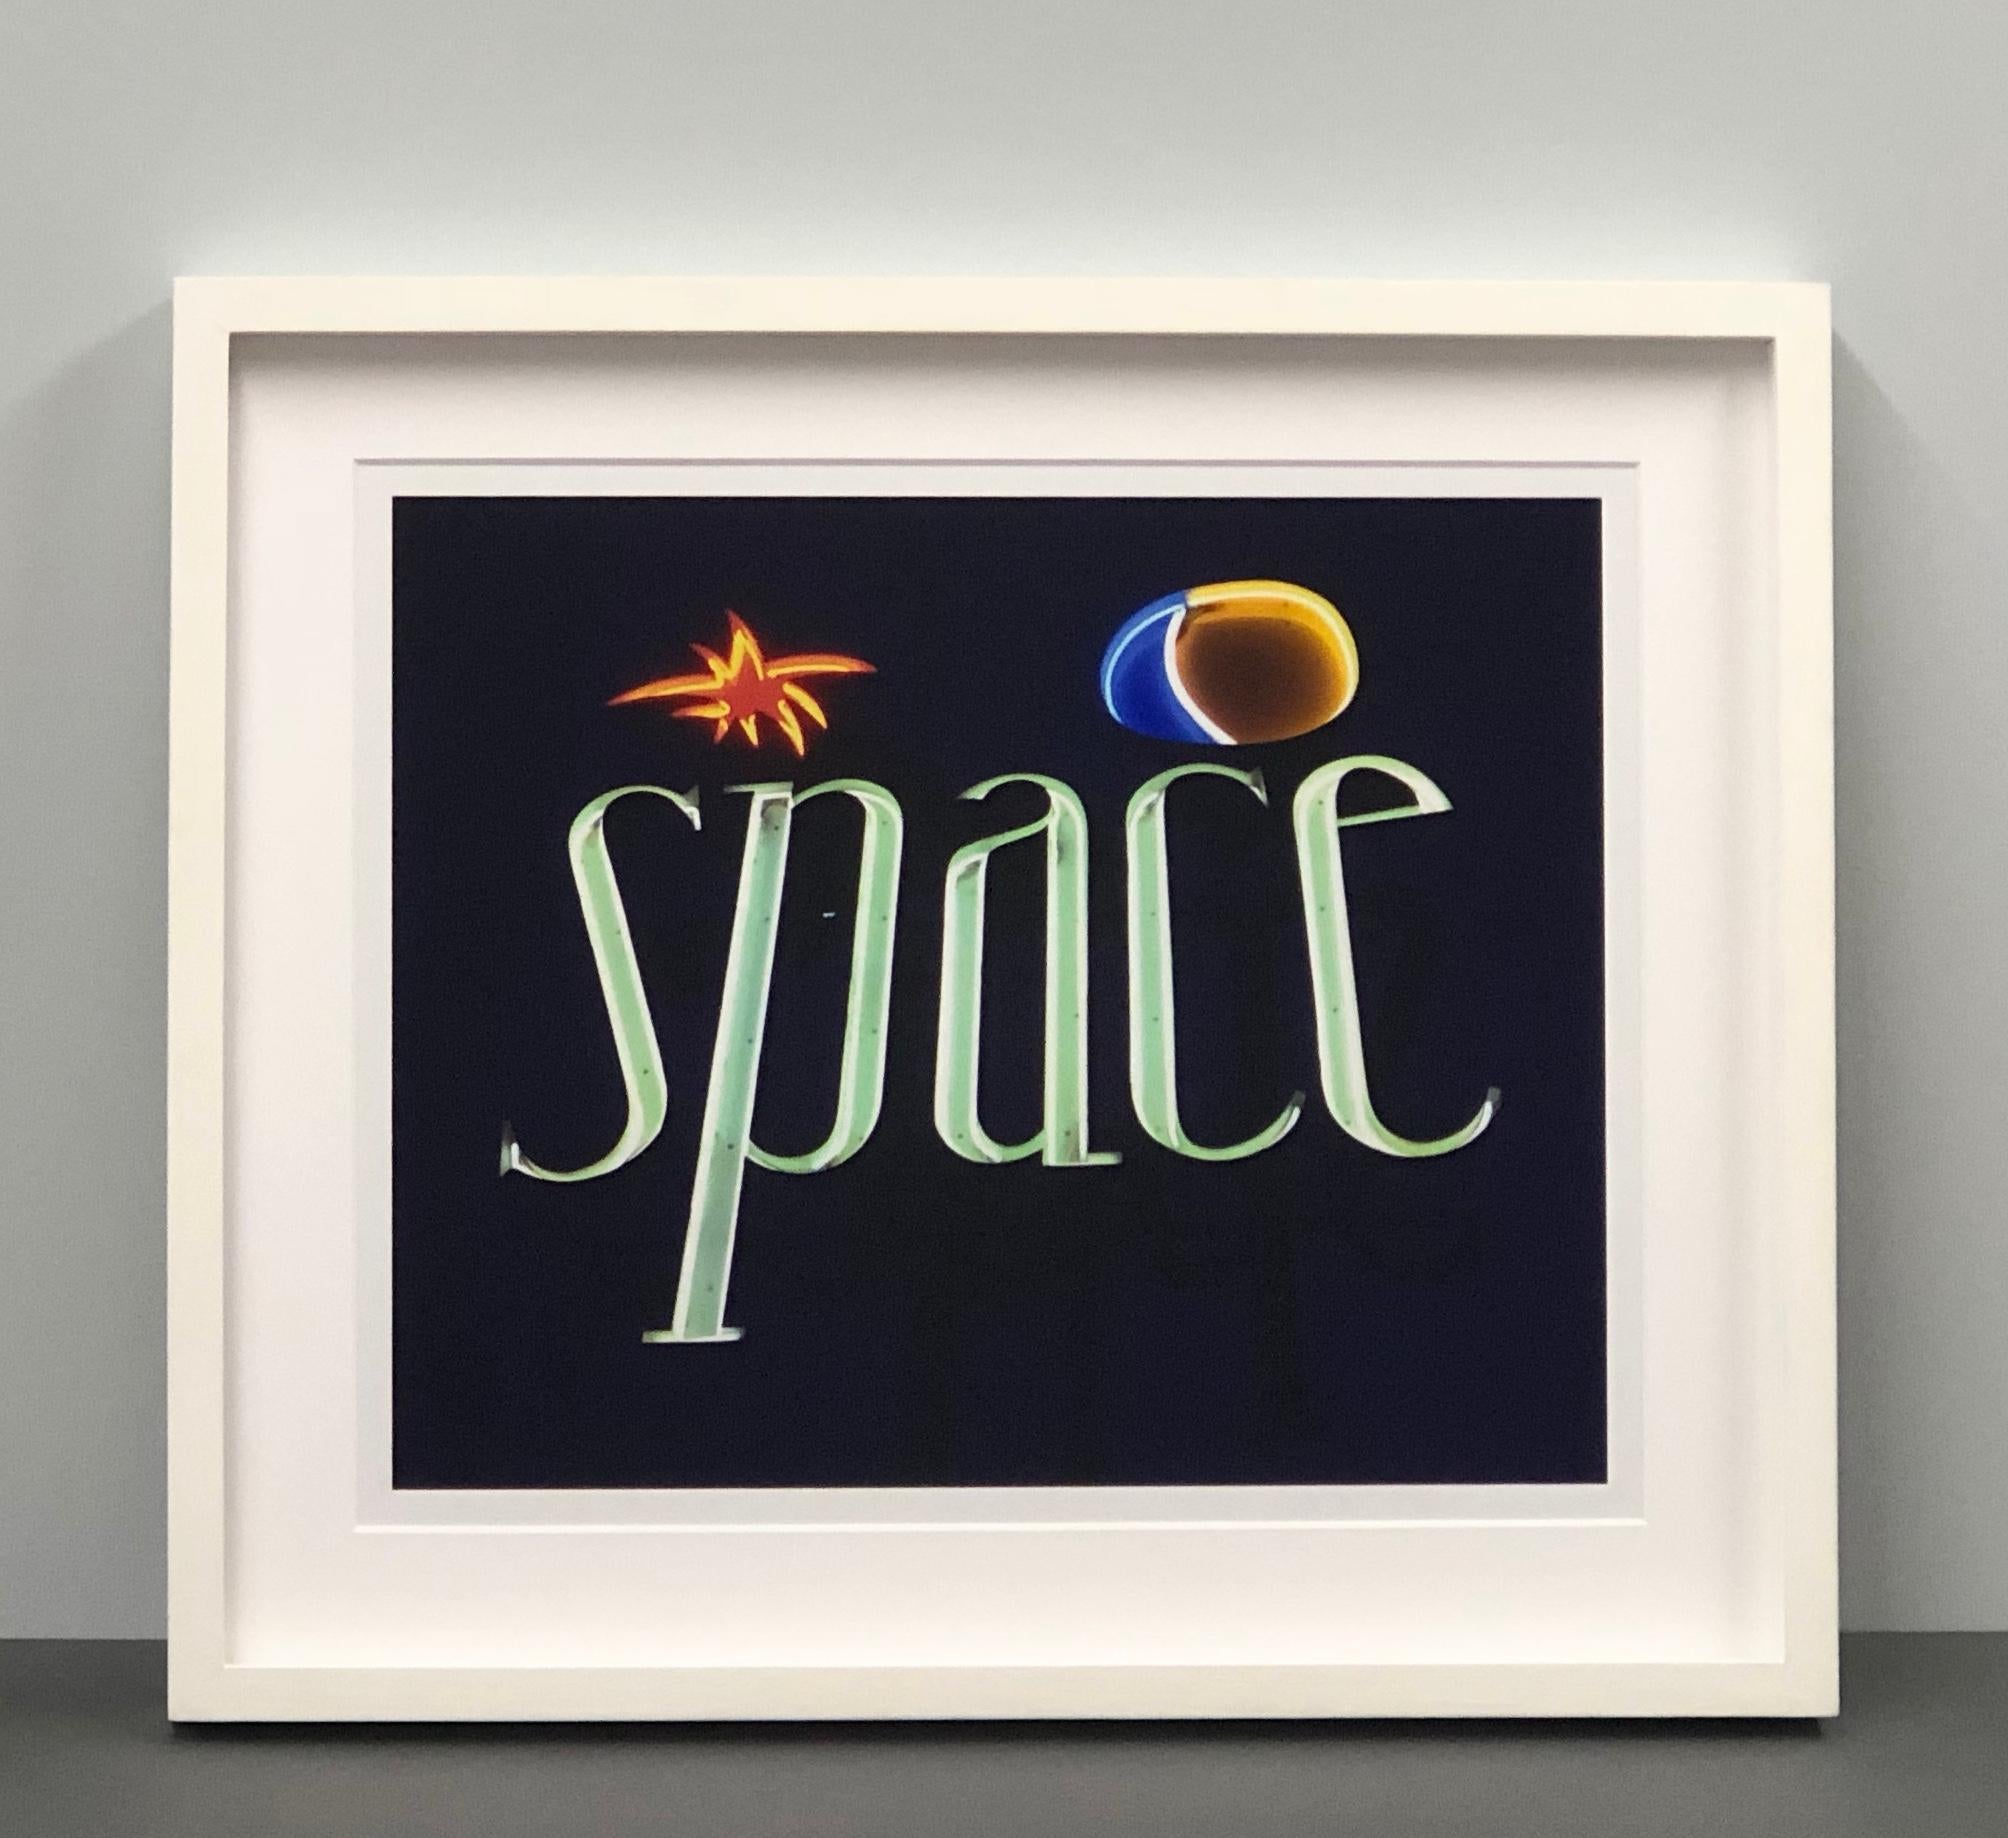 Shot in 2016, the final year of Space Nightclub which was often awarded Best Global Club, Richard once again has captured an iconic sign before it disappeared.

This artwork is a limited edition of 25, gloss photographic print, dry-mounted to